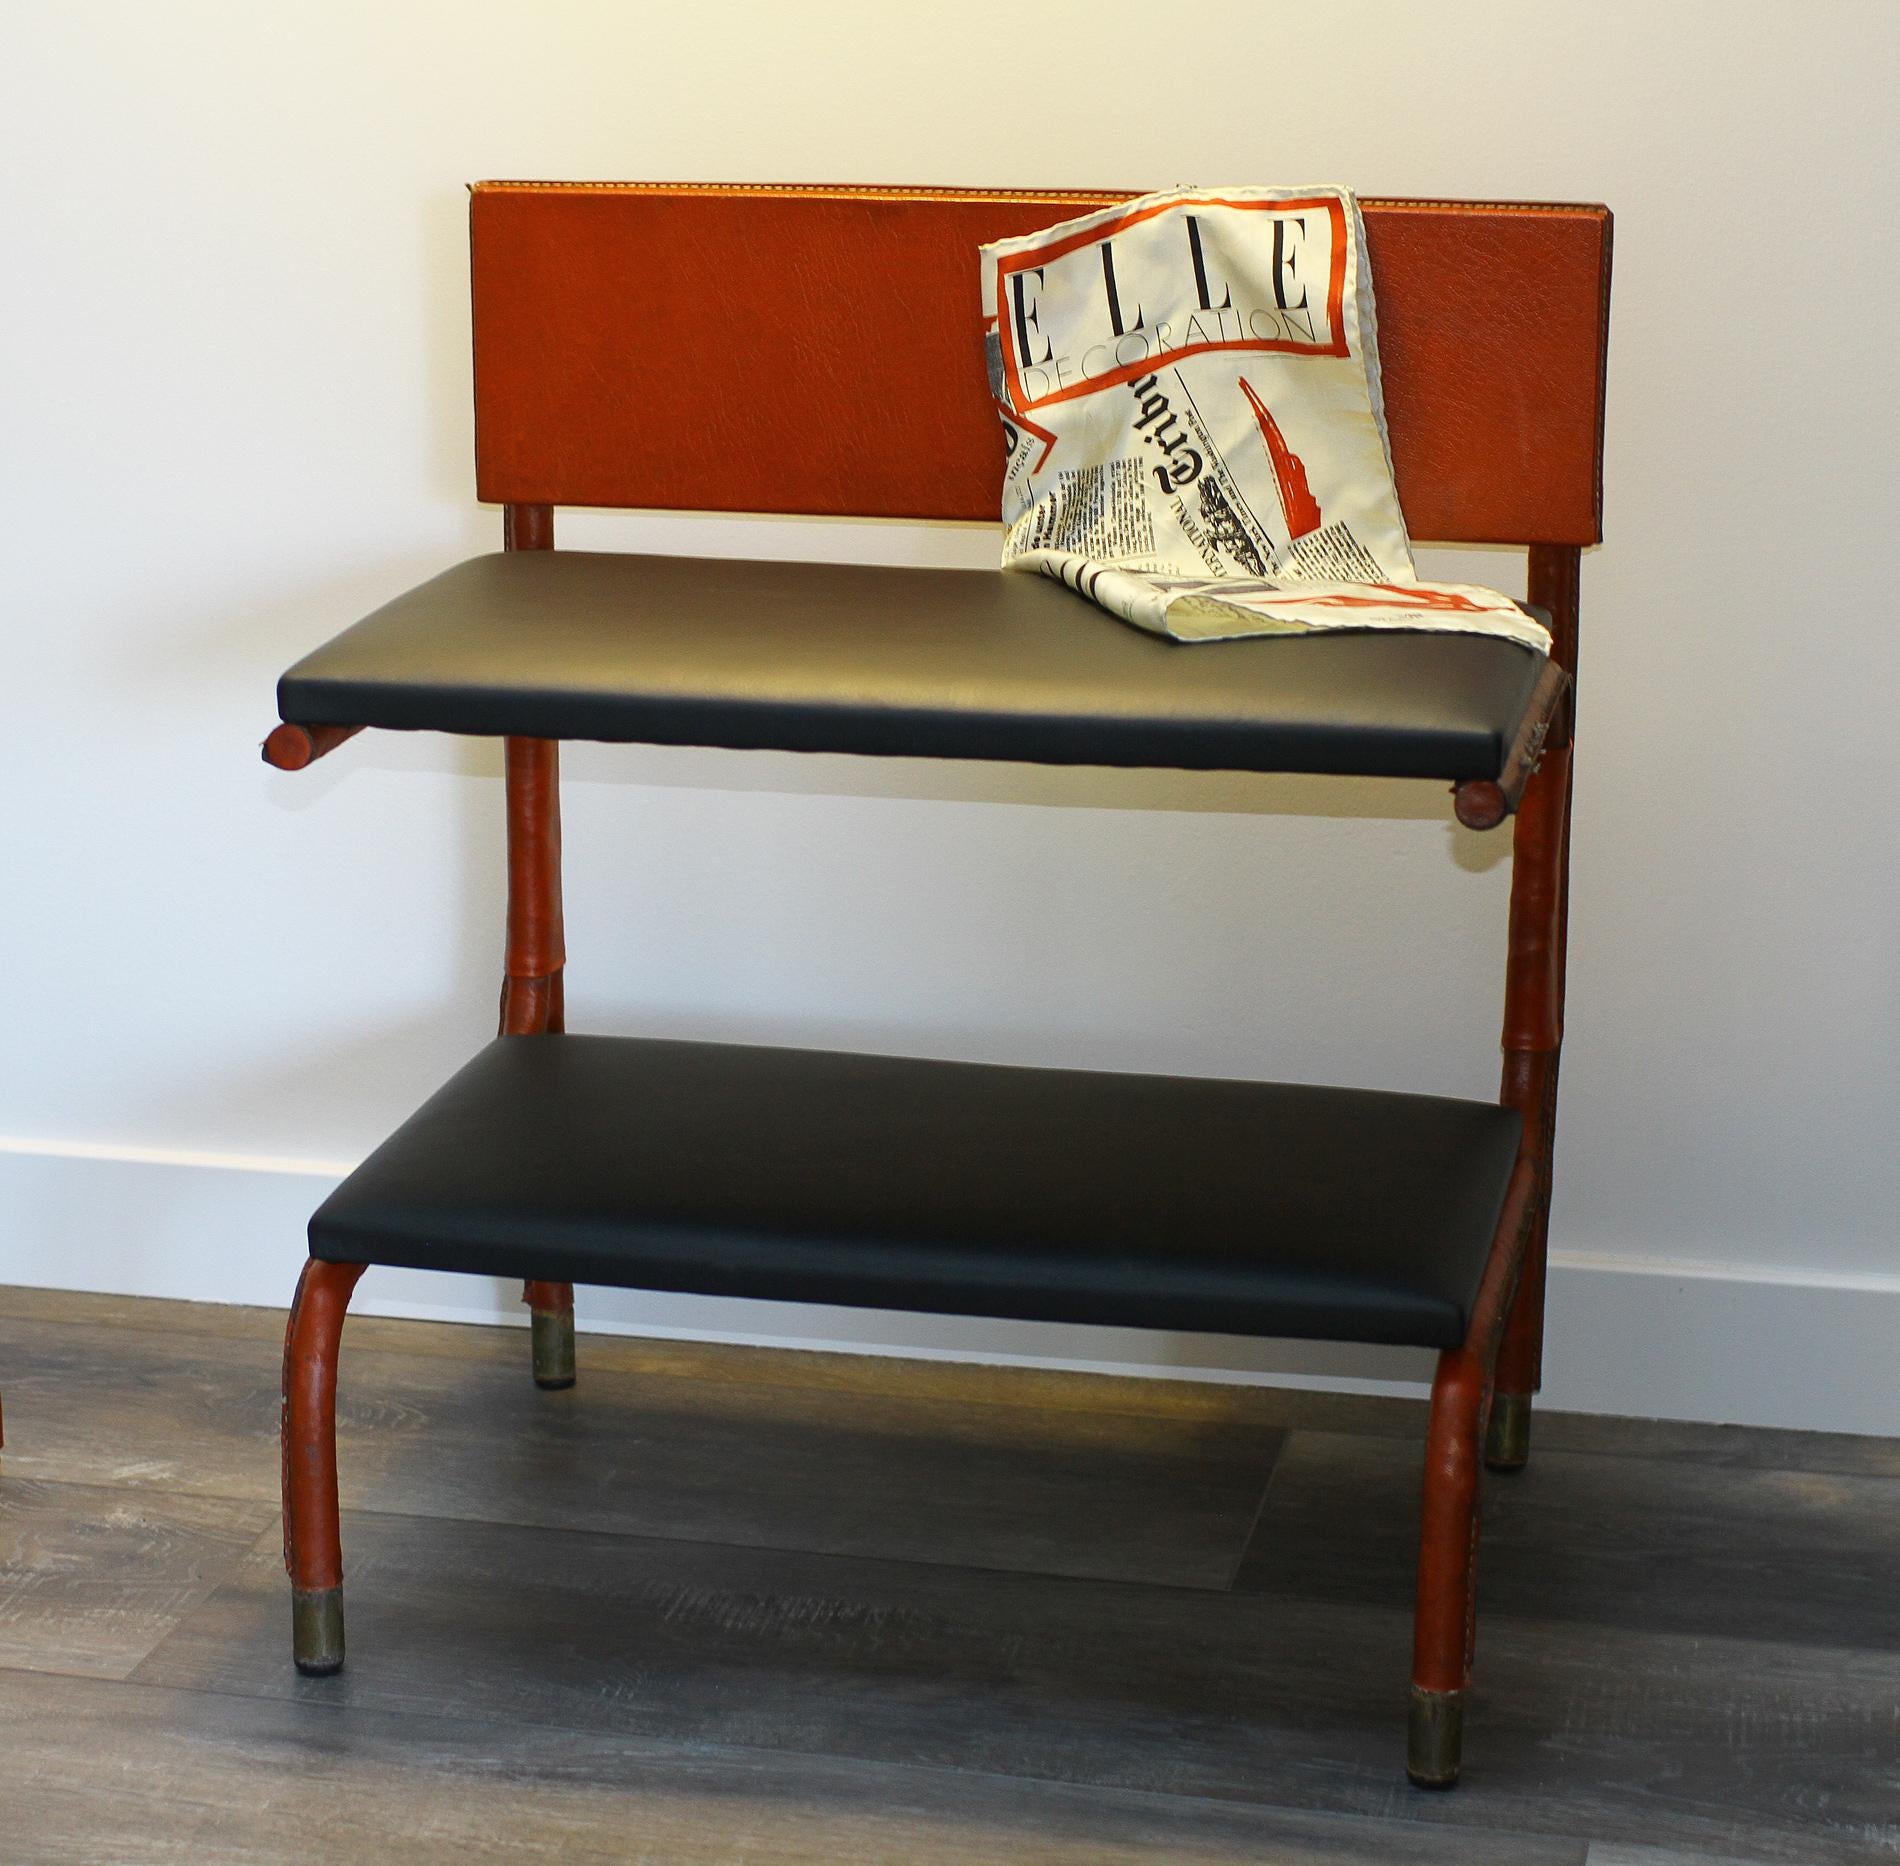 Jacques Quinet (1918-1992)

Rare metal shelf covered in red leather - France 1950-1960

Saddle stitch - Pique Sellier. Brass hardware.

Two shelves covered in black leather on Dacron and wood.

Can also be used as a table. This shelf table